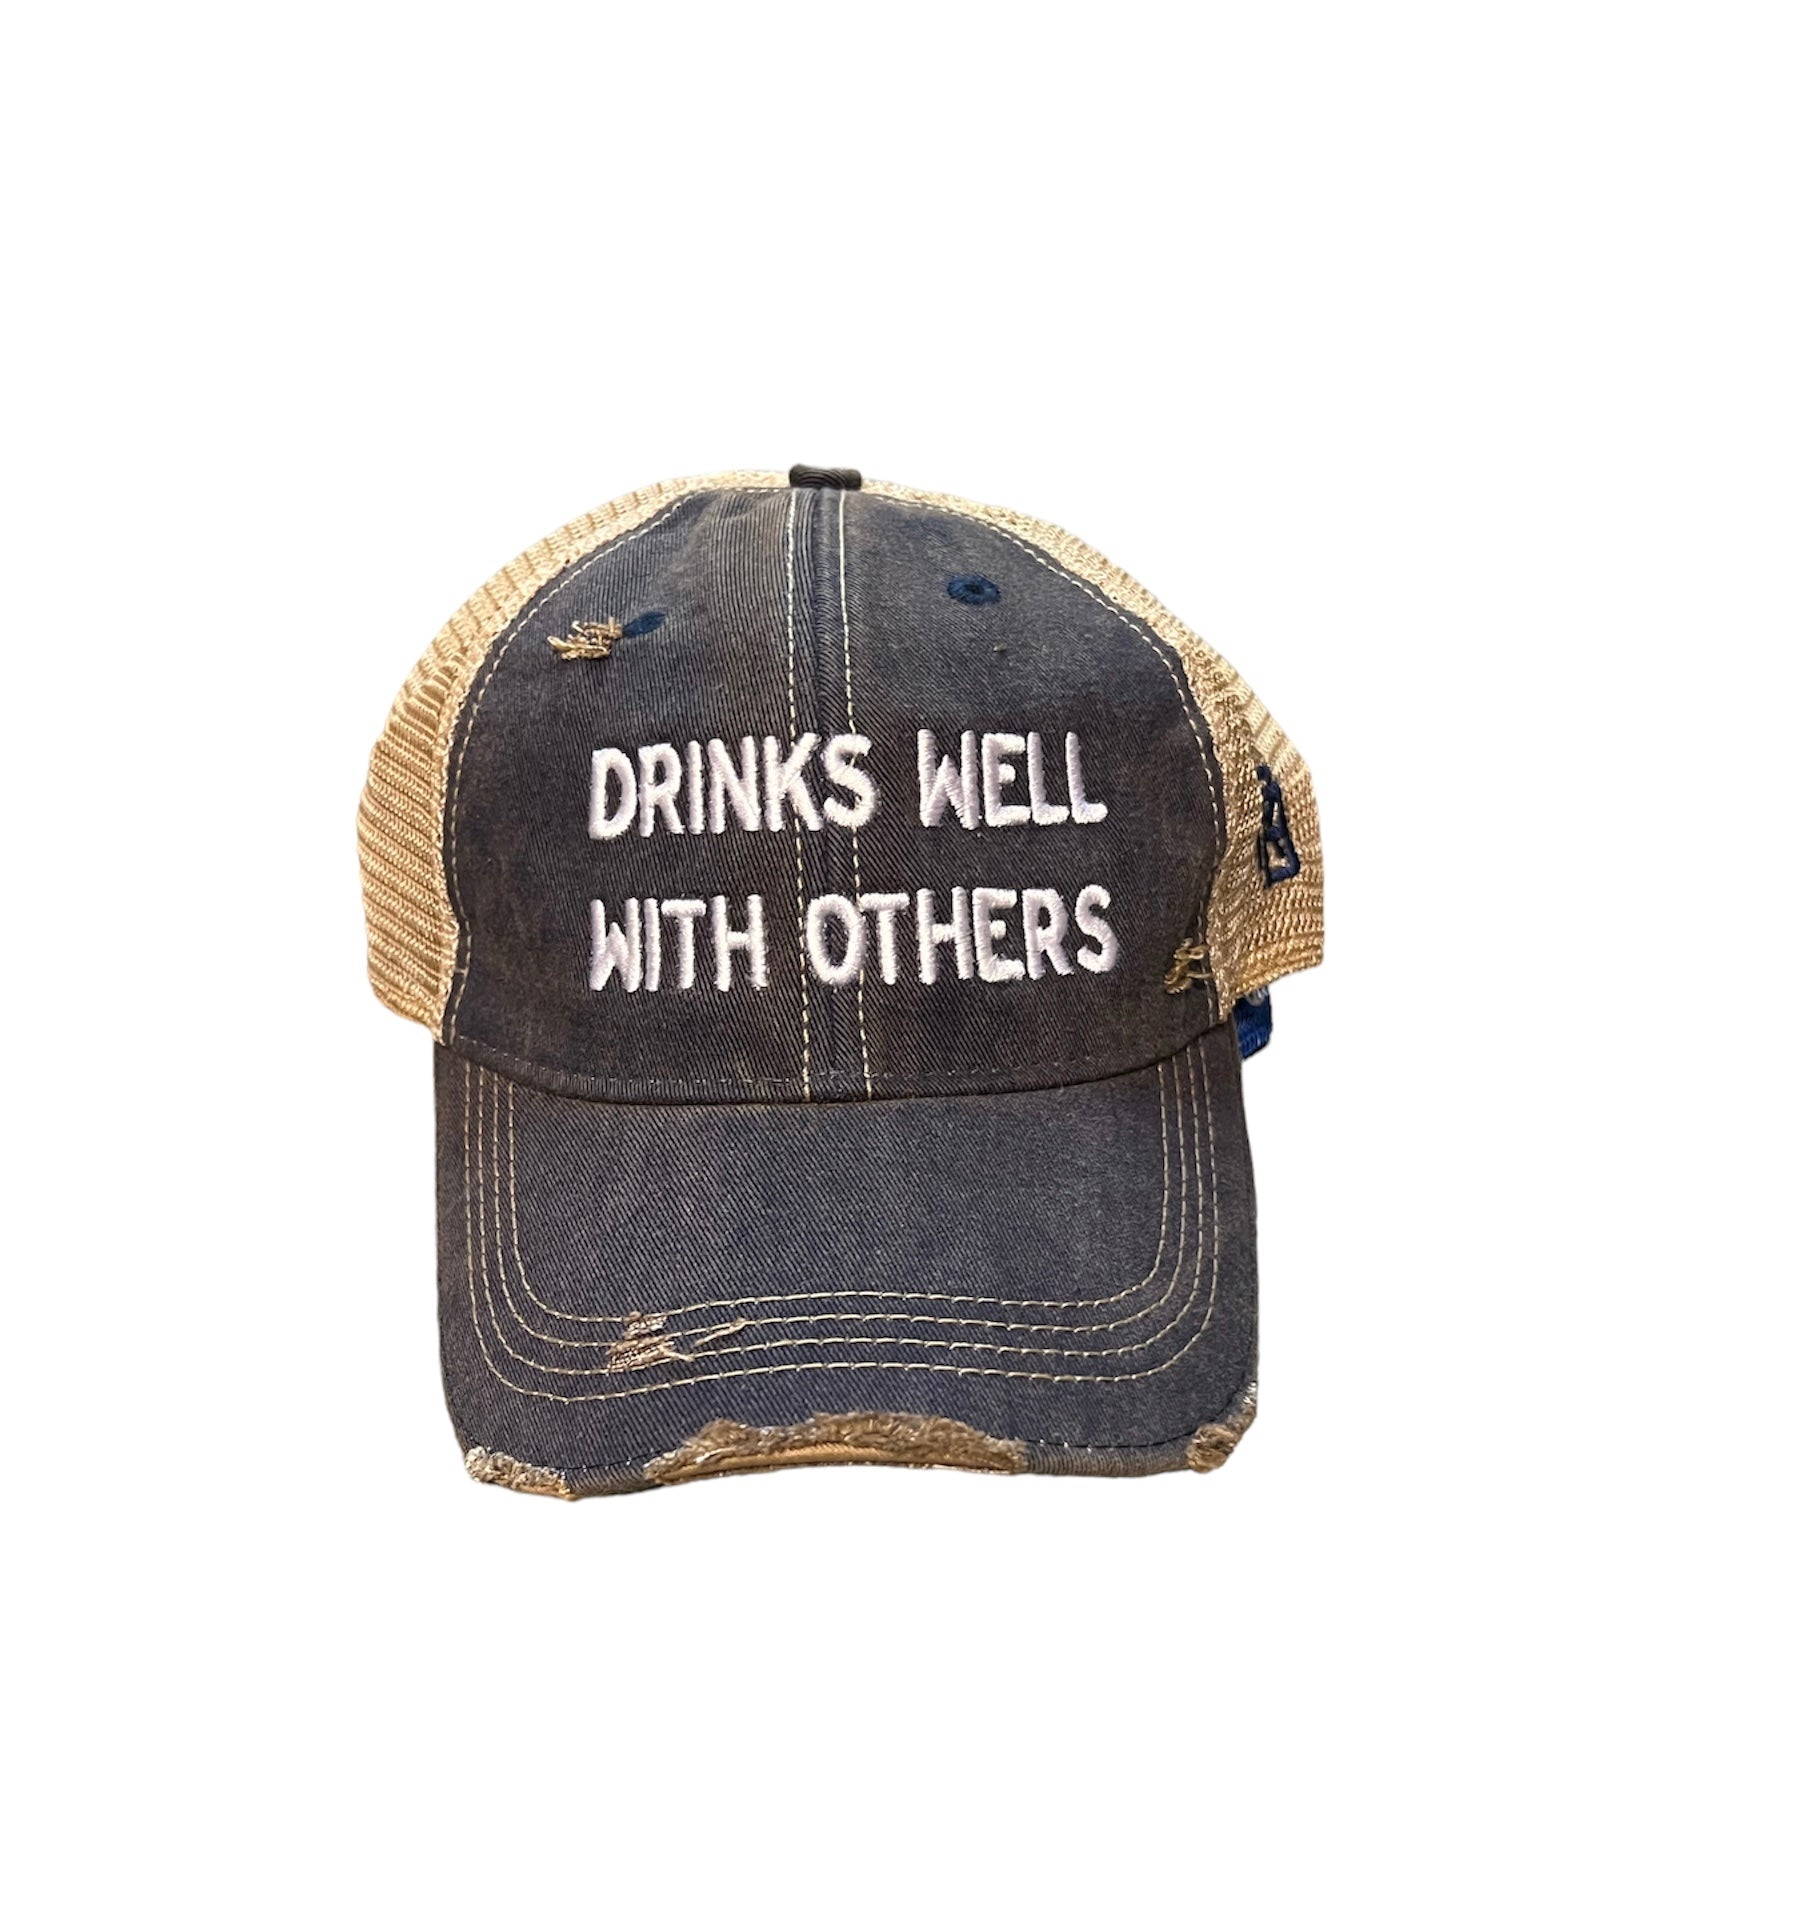 DRINKS WELL WITH OTHERS NAVY TRUCKER HAT